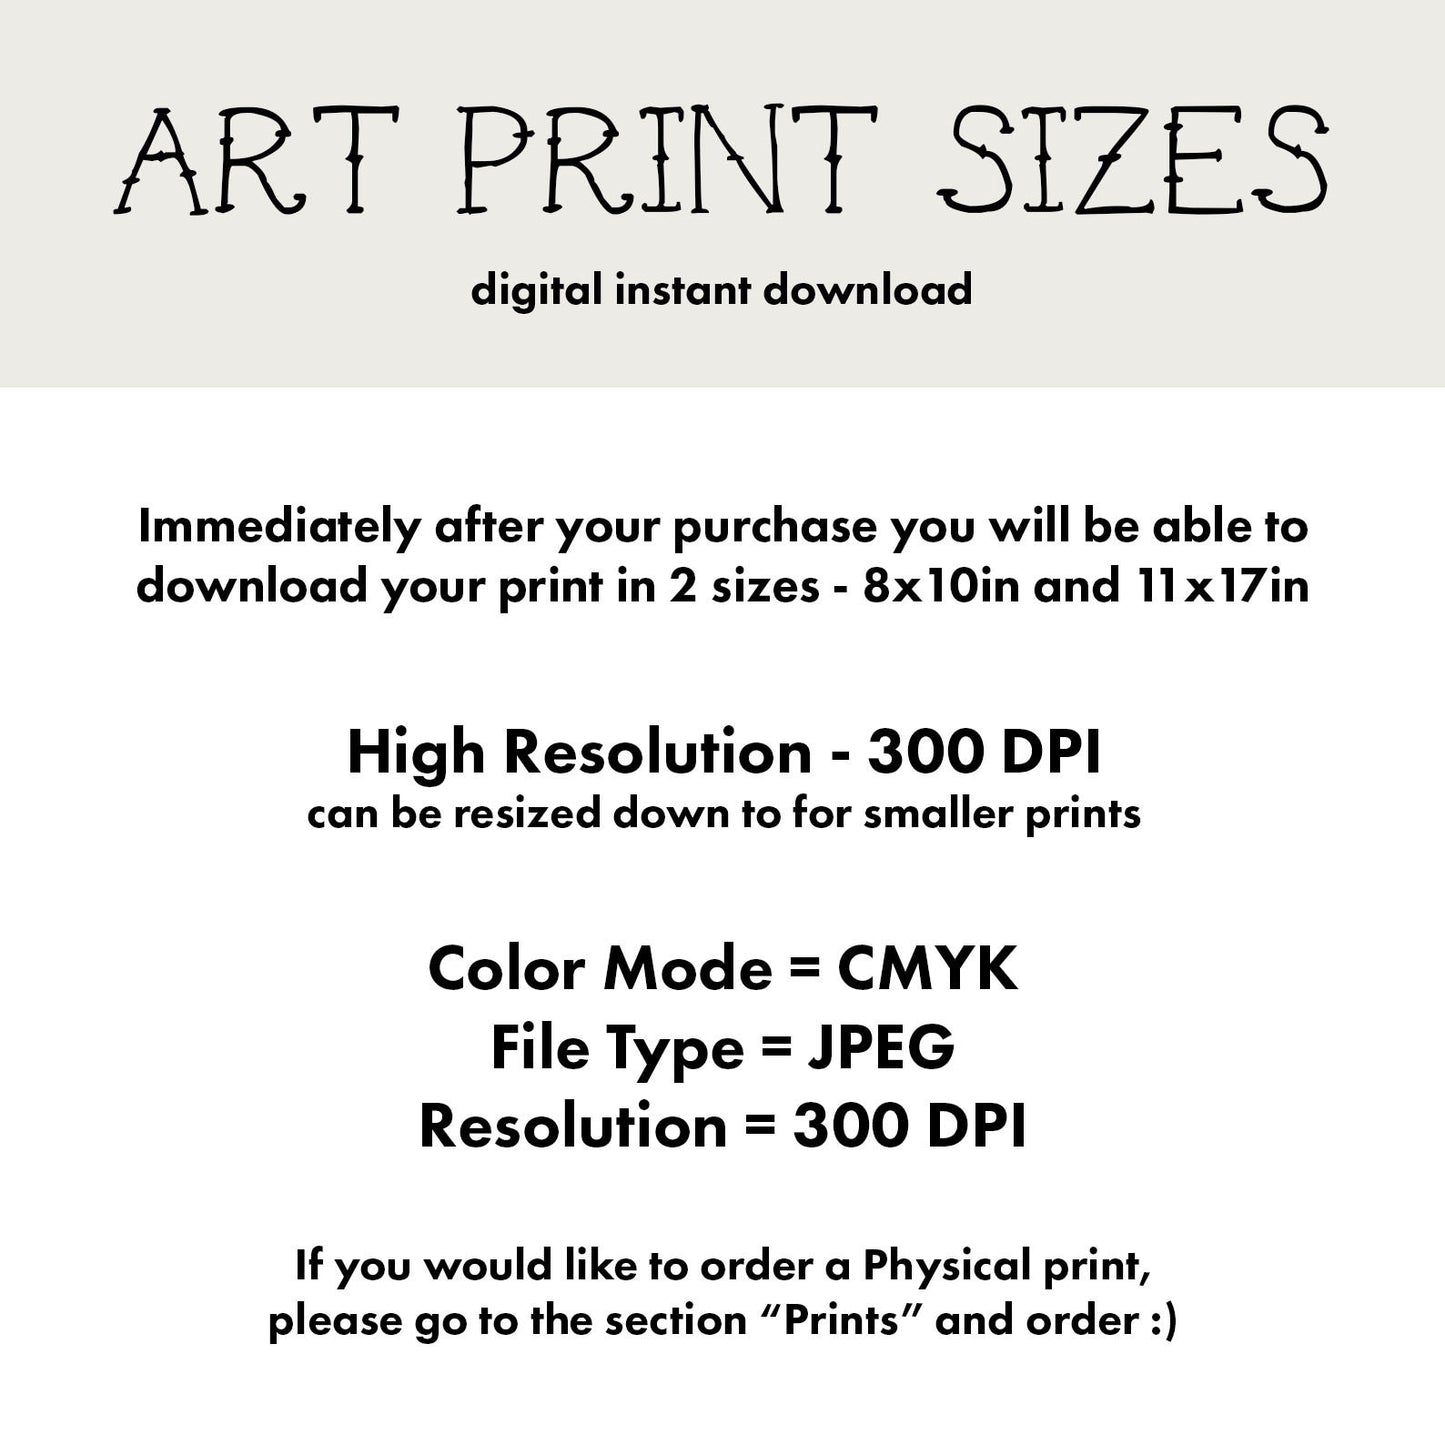 Tattoo Style Poster - A Sight for Sore Eyes - Art Print Wall Art - Instant Download - Printable Art